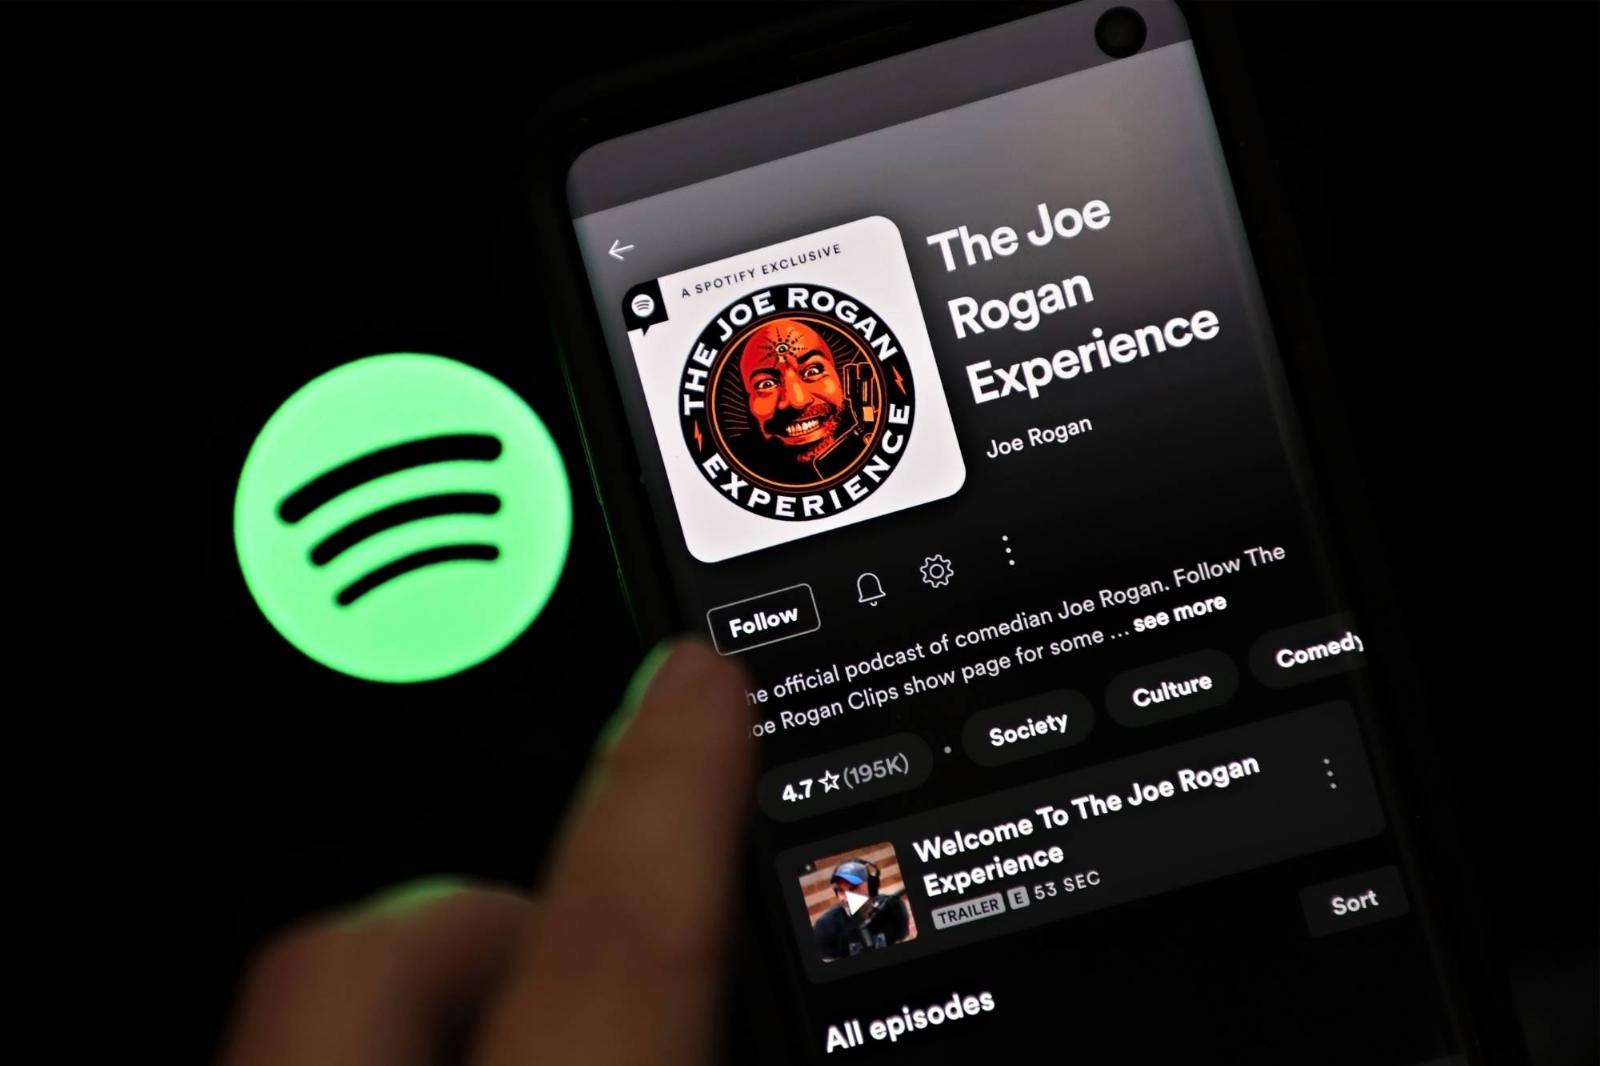 Actually, it’s good for Spotify that Joe Rogan’s podcast is no longer exclusive